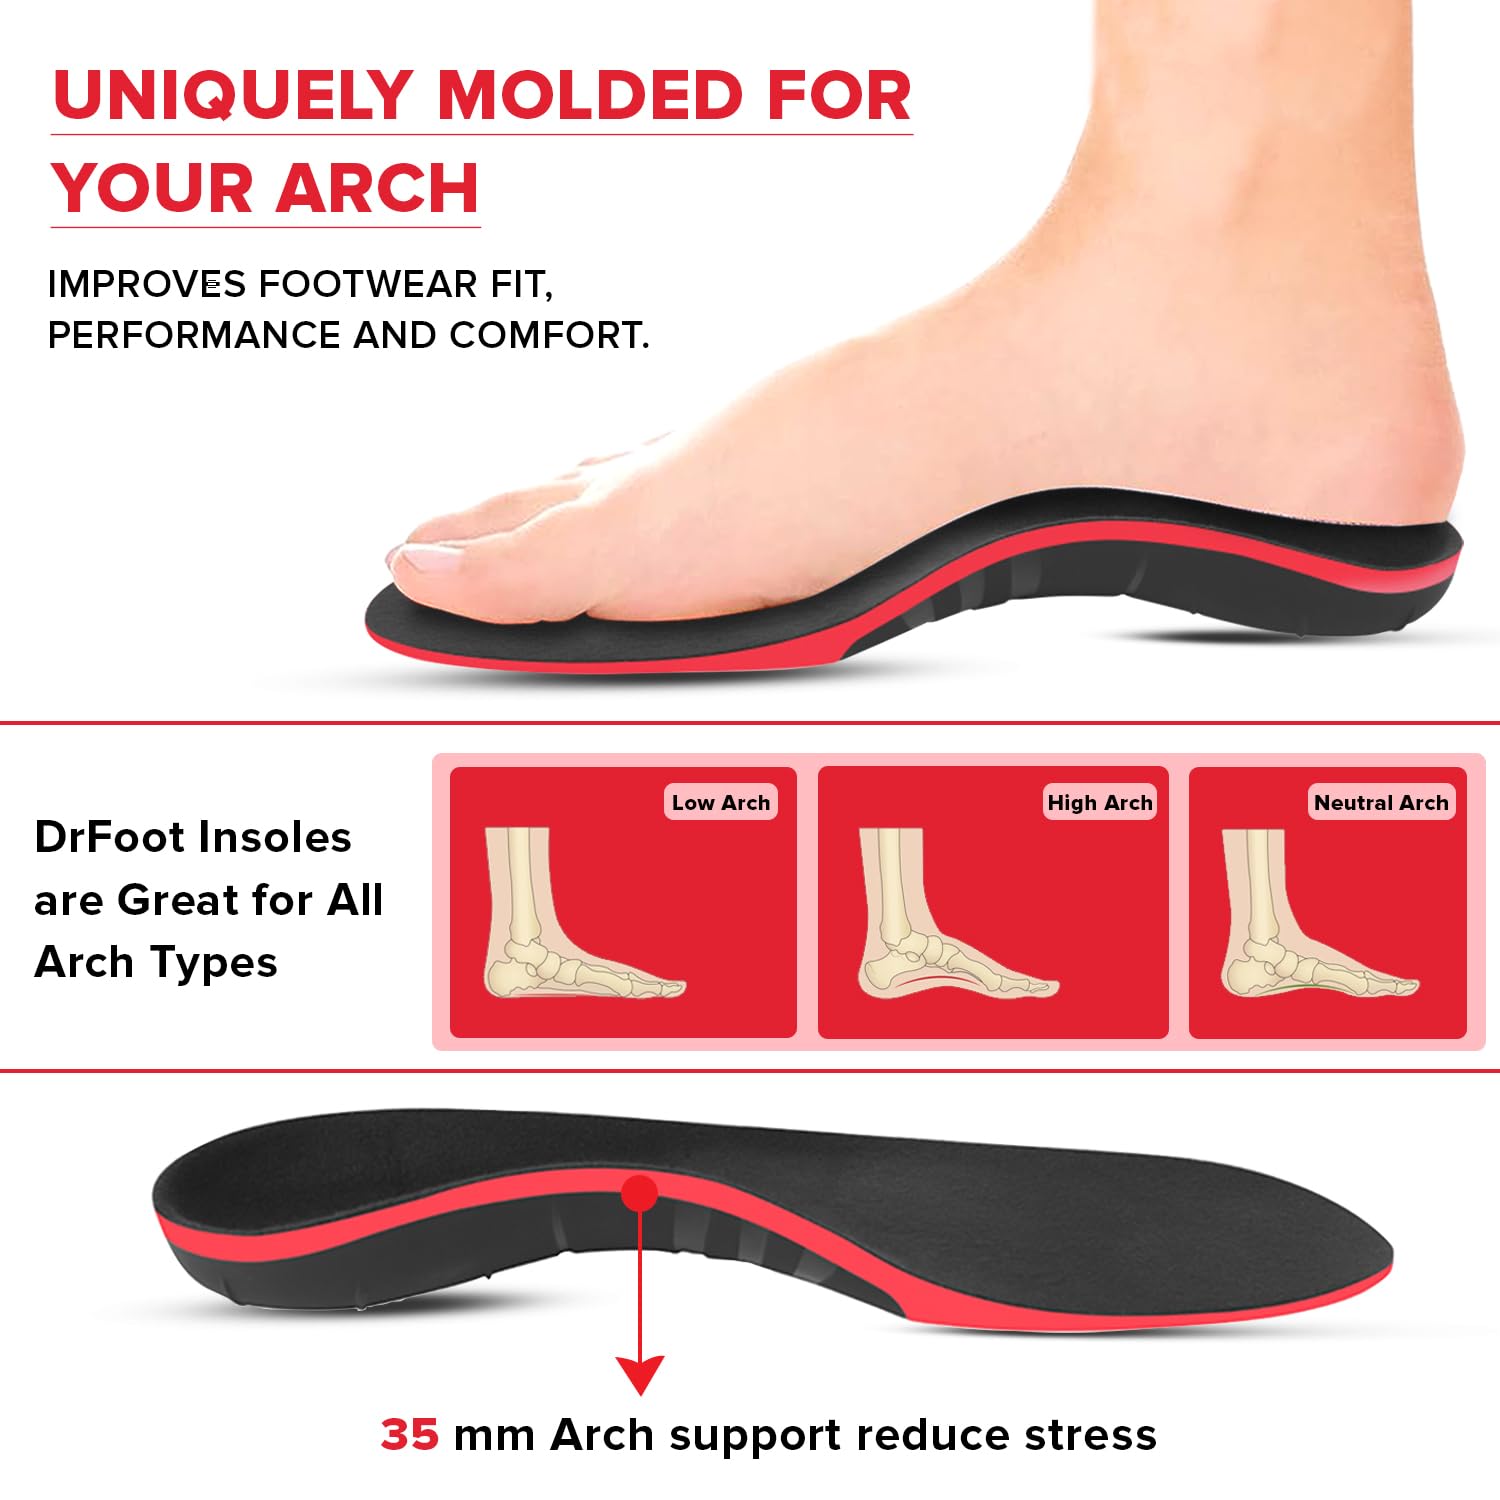 Dr Foot High Arch Support Insoles | Shoe Inserts For Plantar Fasciitis, Flat Feet, Feet Pain, Heel Spur Pain |For All Day Comfort & Support & Shock Absorption| For Men and Women -1 Pair (XS Size)